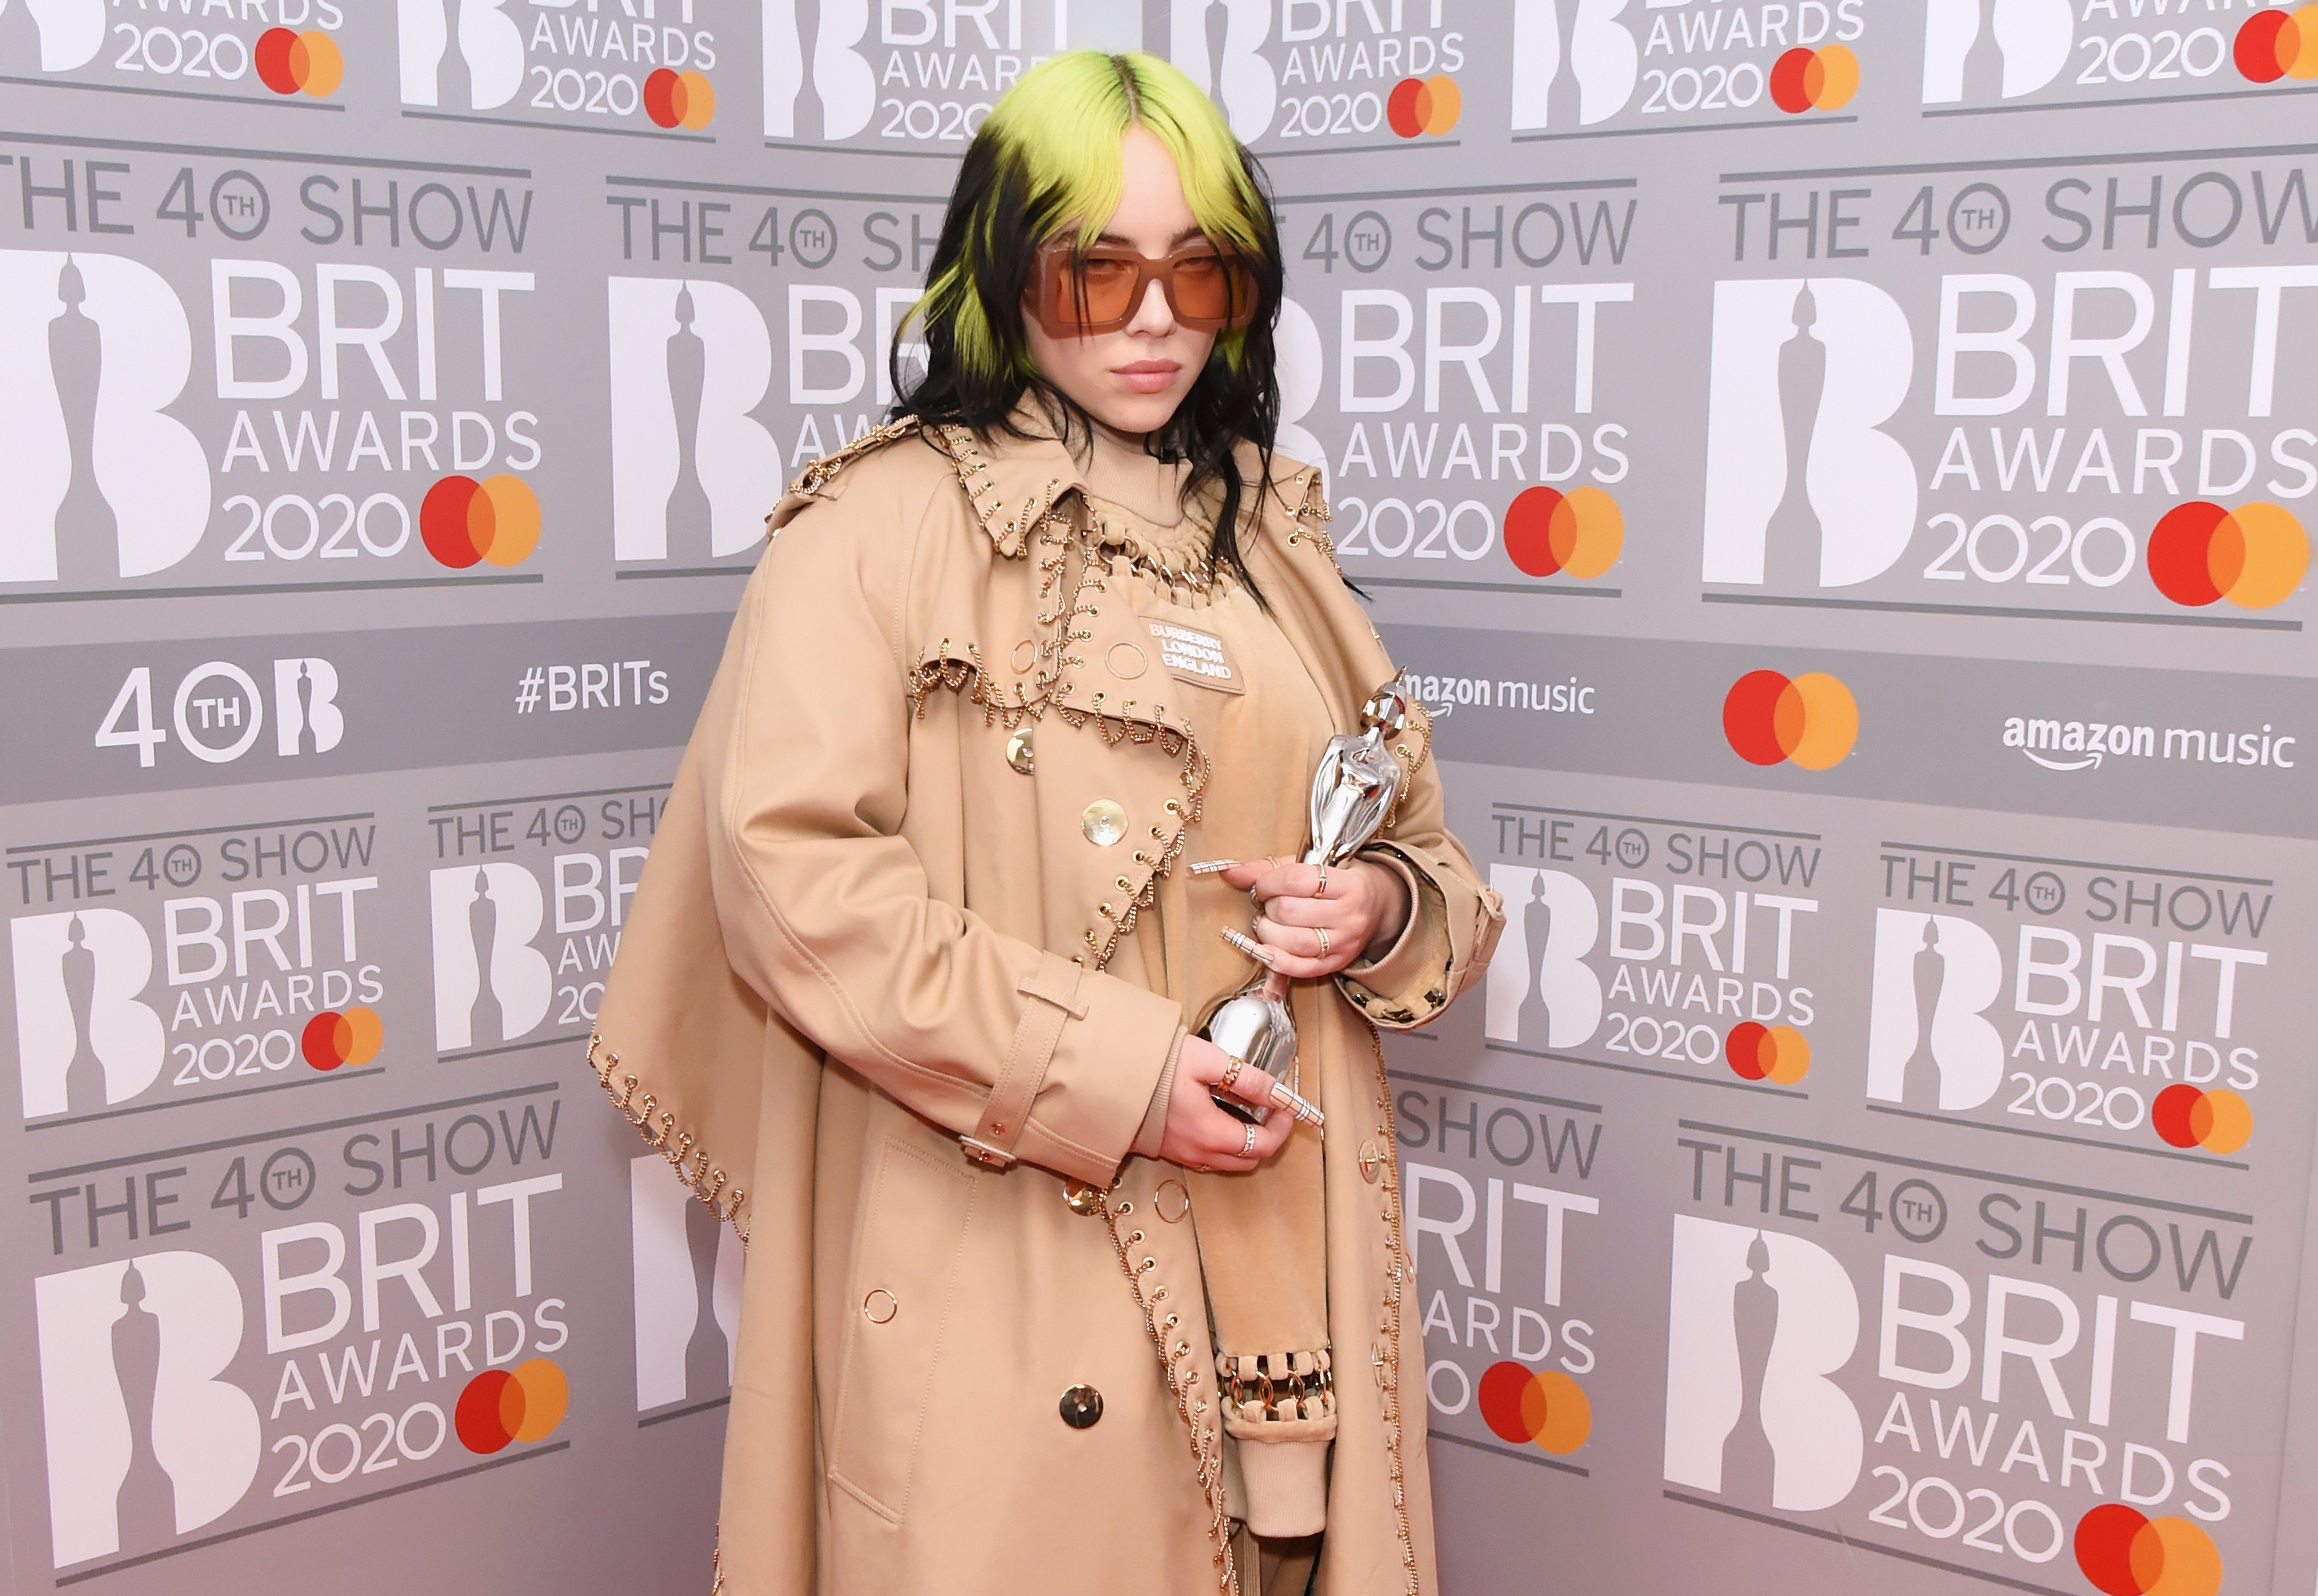 Billie Eilish holding an award in front of a gray background